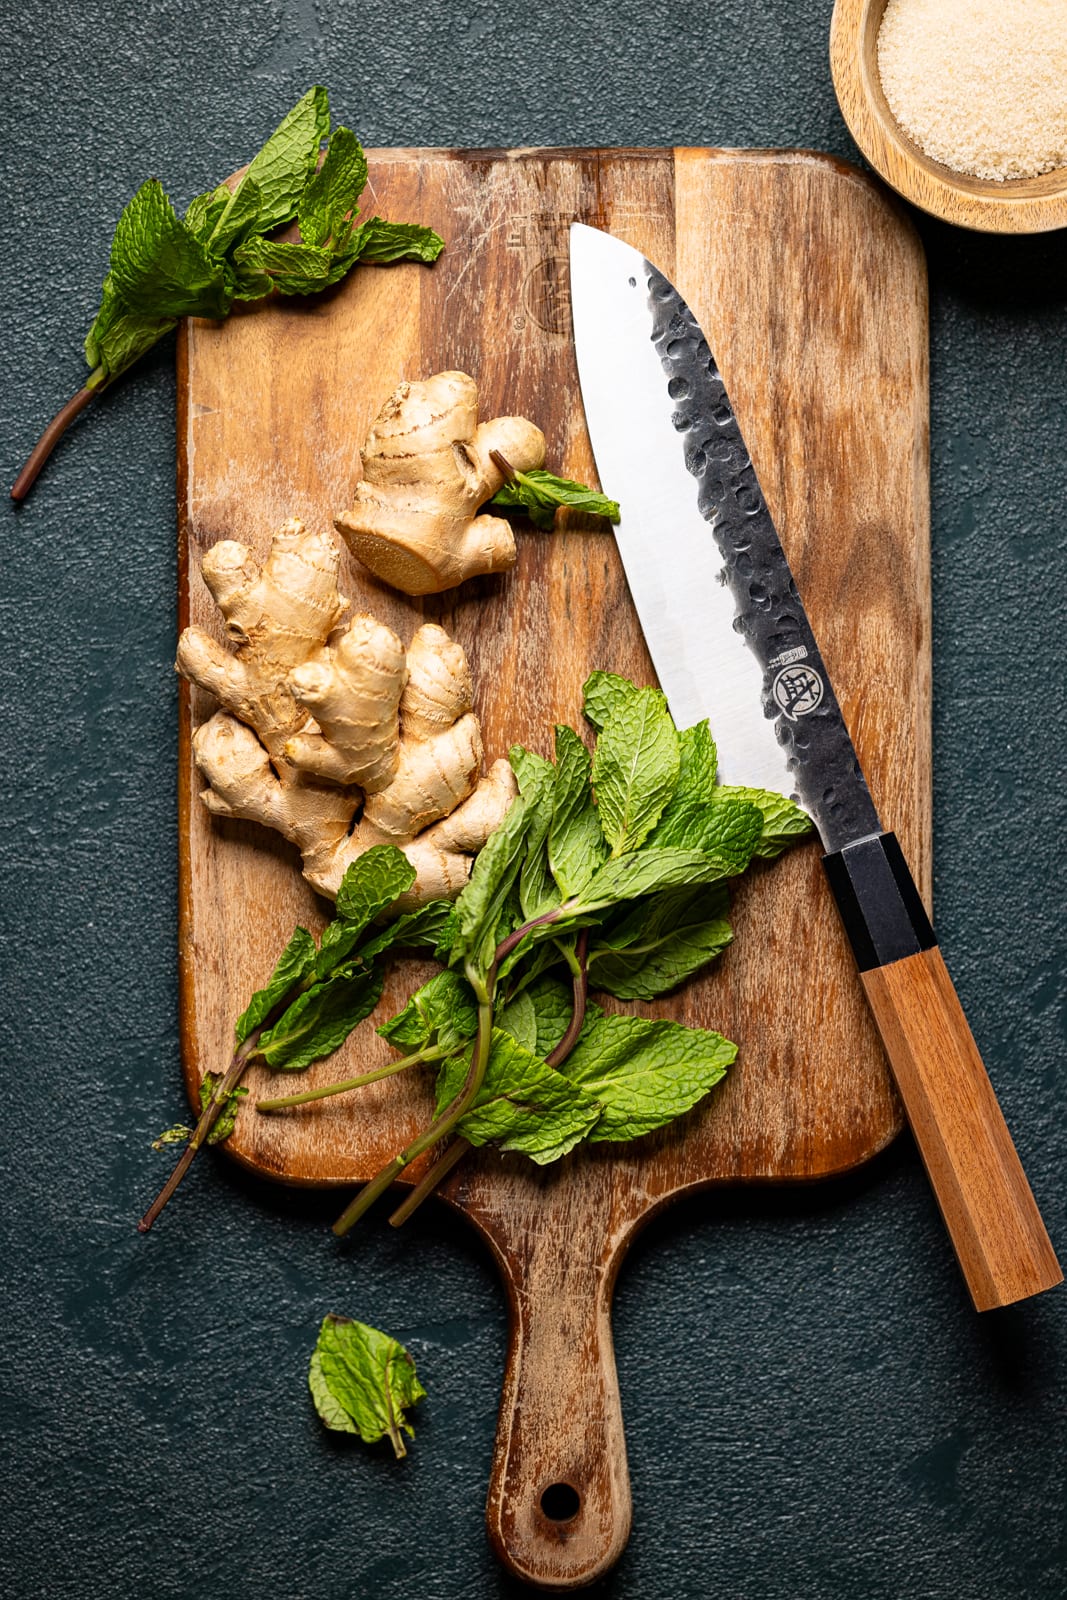 Ginger root and fresh mint leaves on a cutting board with a knife.